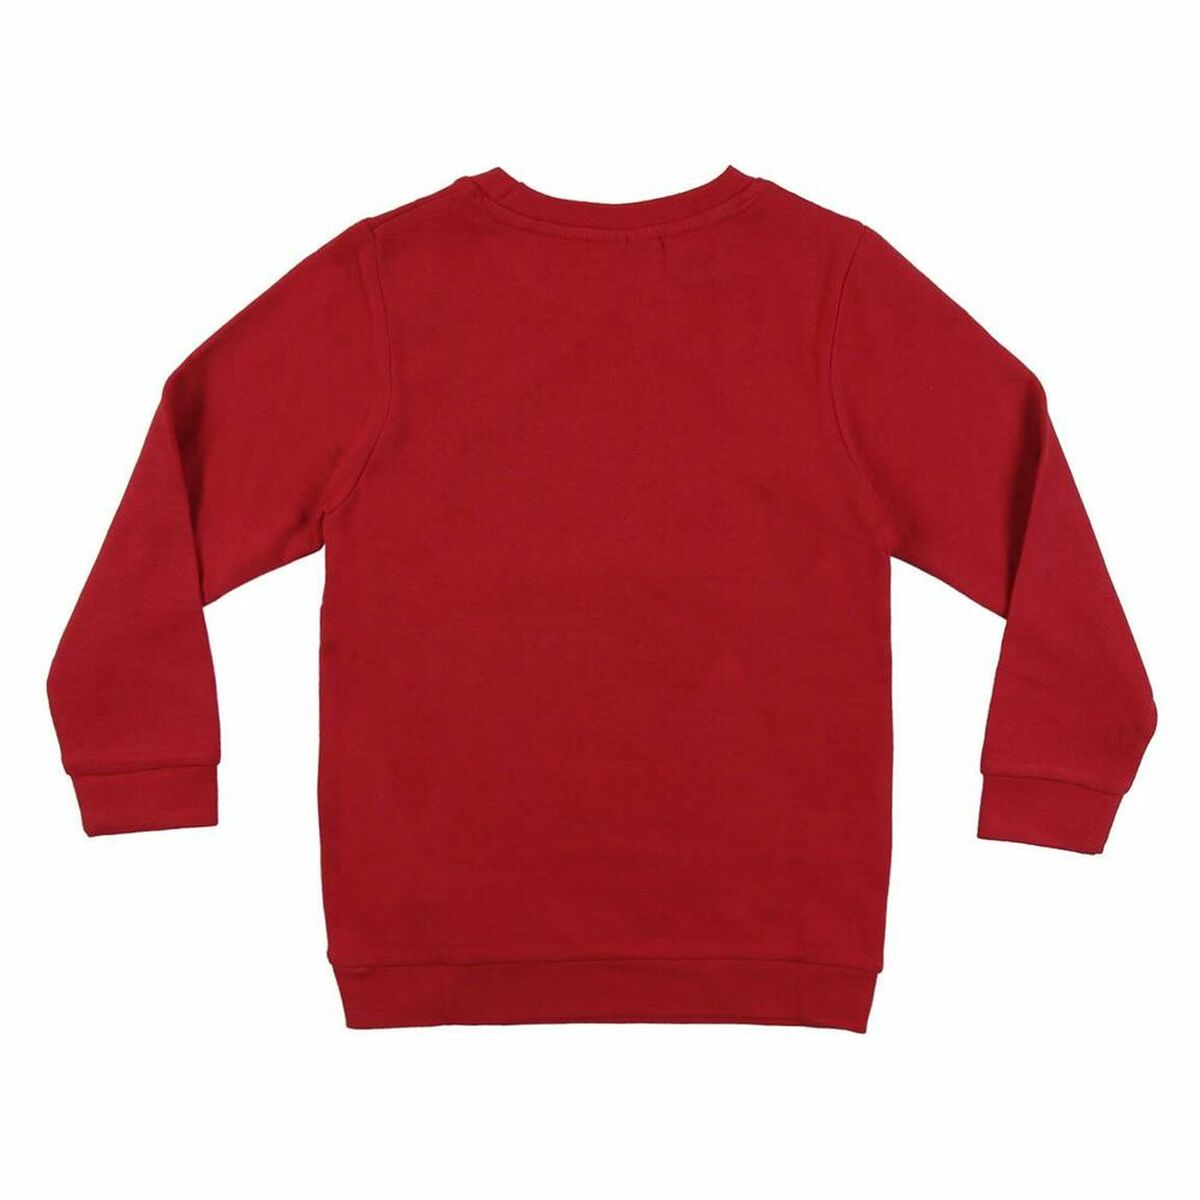 Jungen Sweater ohne Kapuze Mickey Mouse Rot